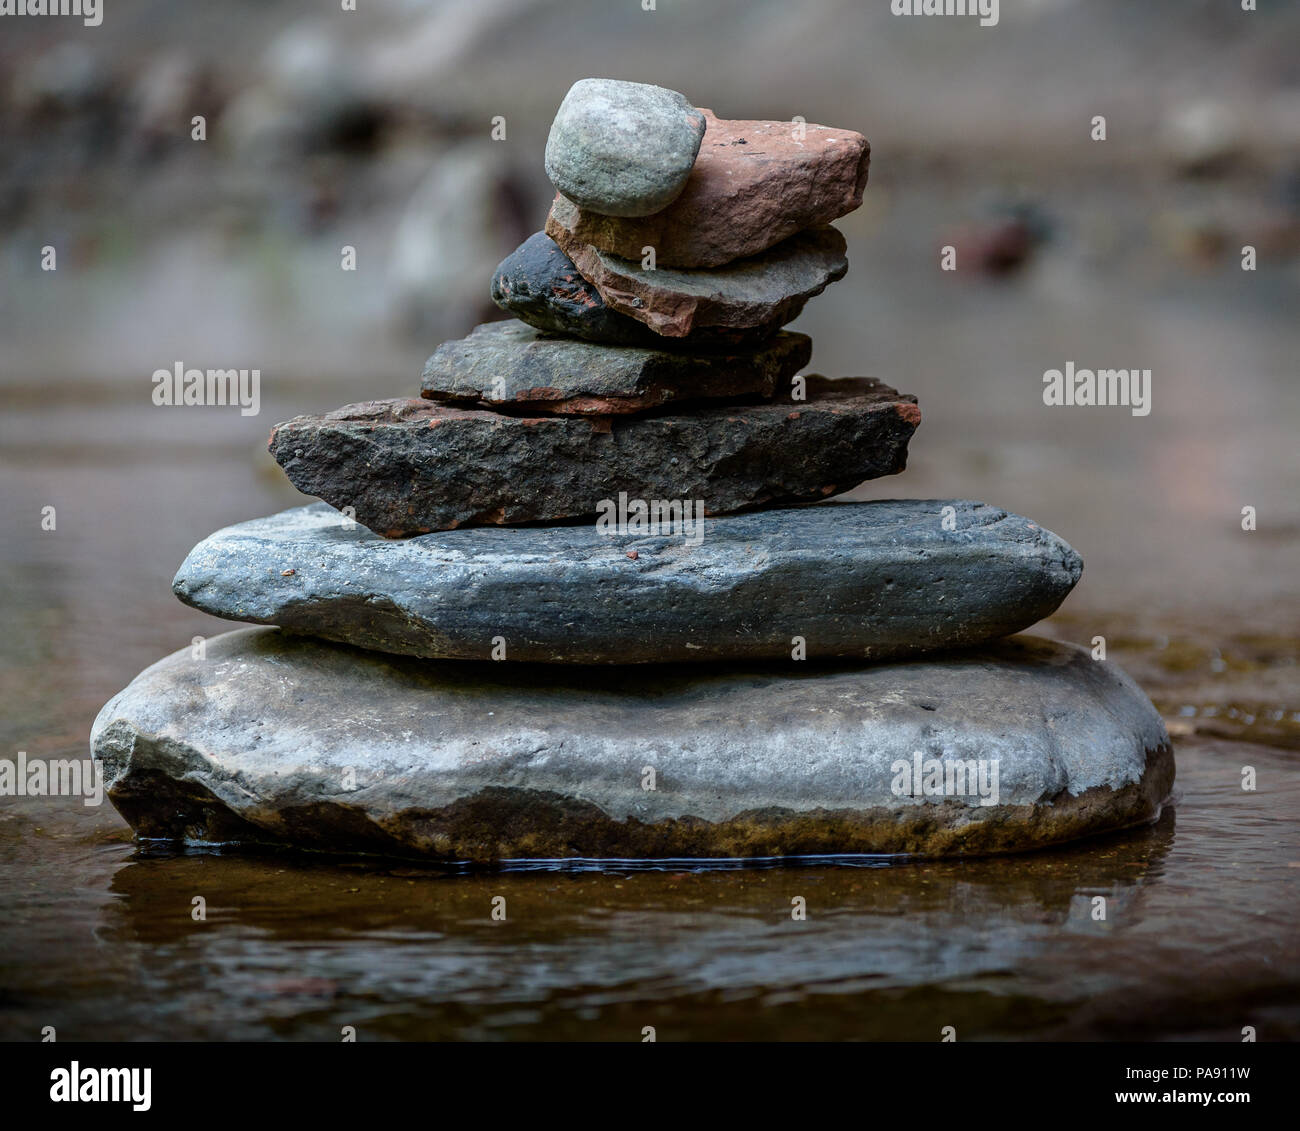 Balance and wellness concept. Close-up of river stones balanced in the shallow mountain creek. Low depth of field. Zen and spa inspired Stock Photo